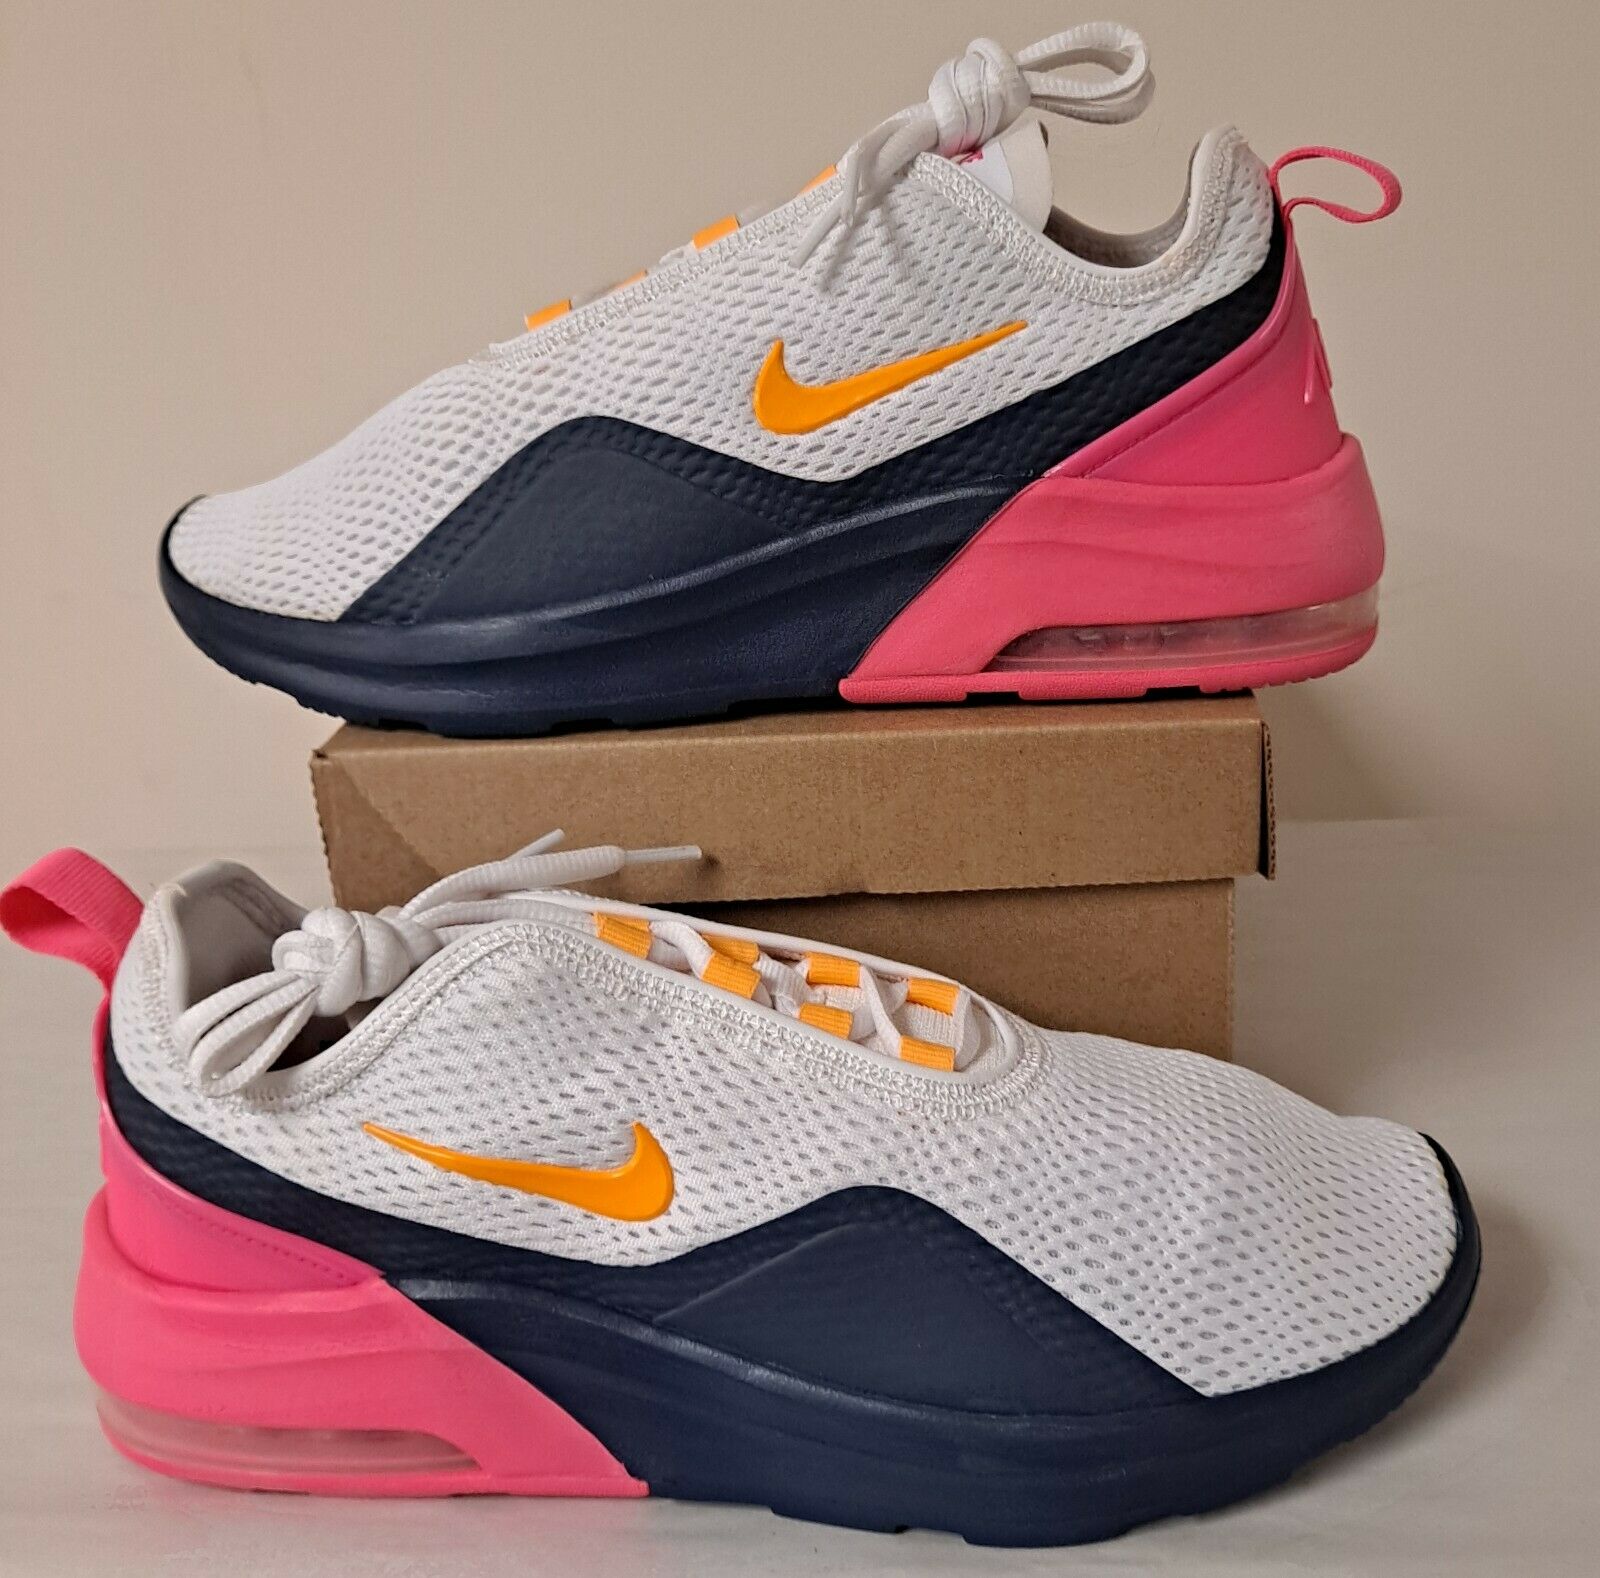 Nike Air Max Motion 2 Women's Shoes Sneakers Trainers CI6515 100 Size 9.5